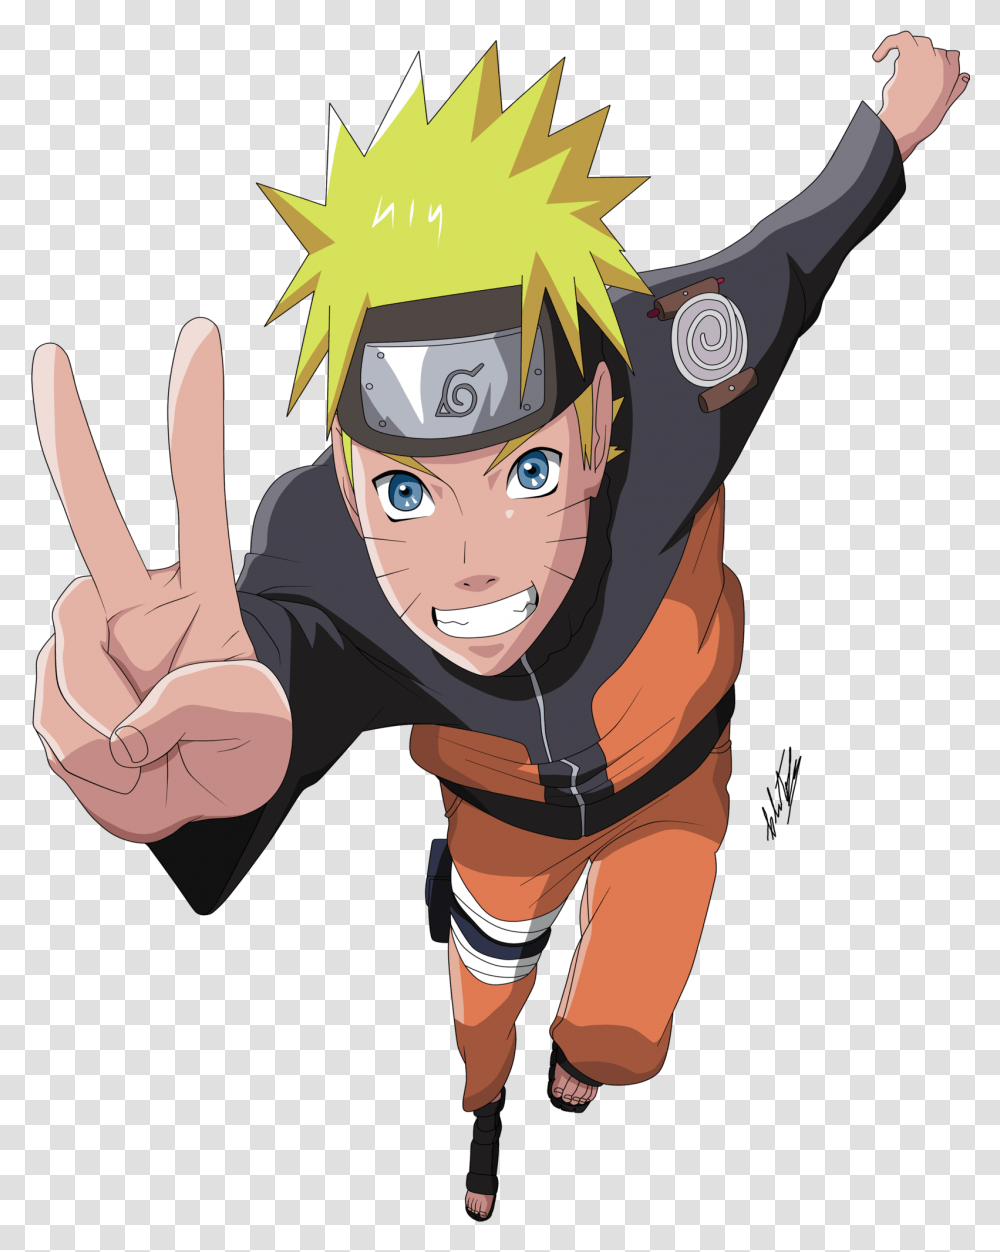 Download Hd Personagens Animes Naruto Peace Sign, Clothing, Hand, Comics, Book Transparent Png